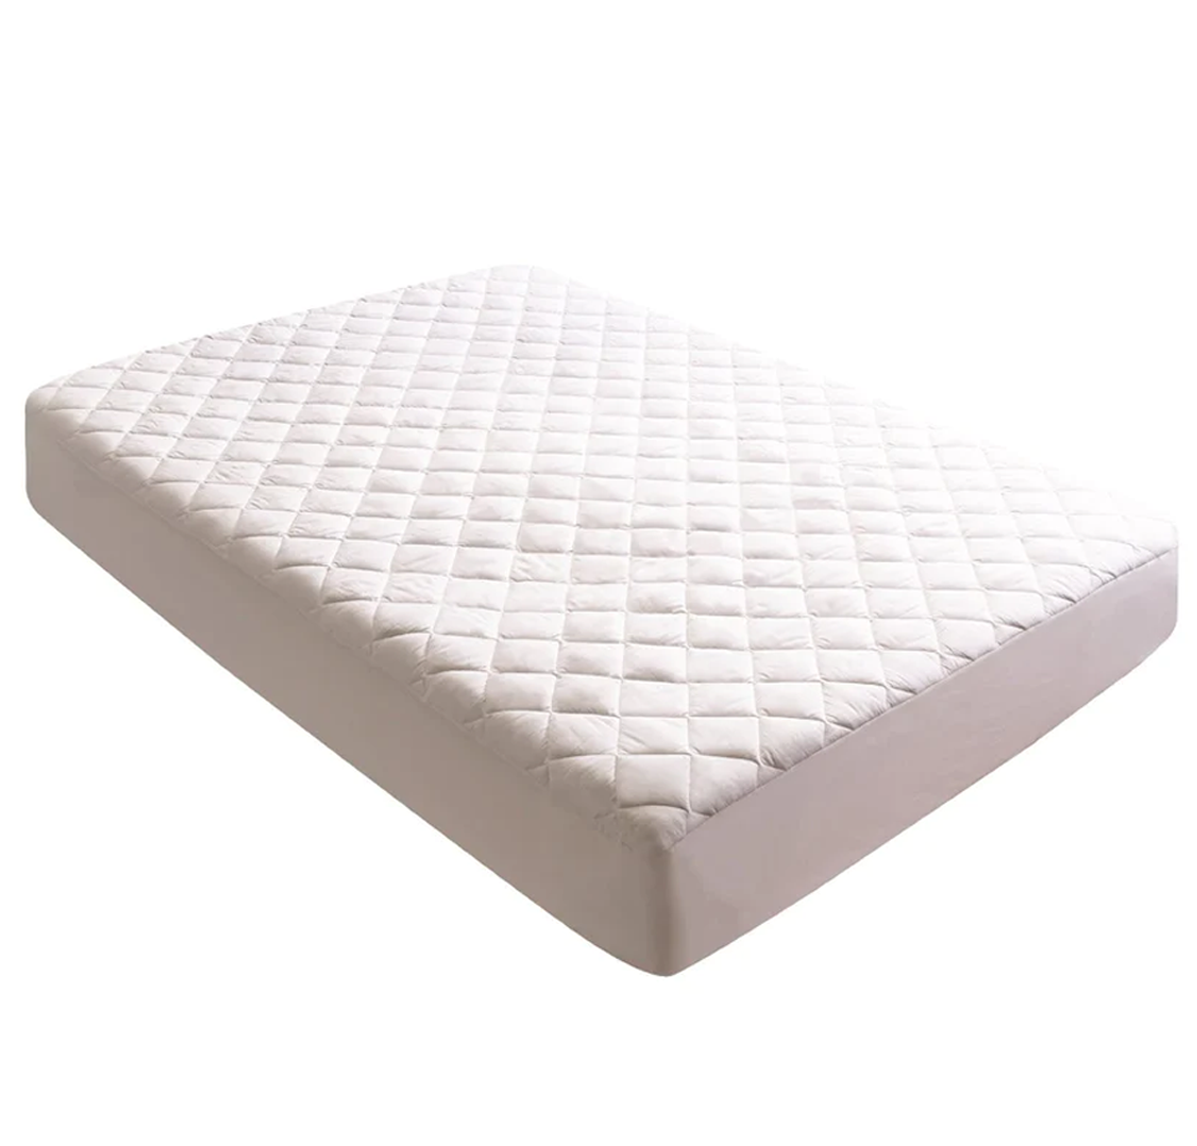 Durable 100 Percent Cotton & Polyester Mattress Cover | Mediflow